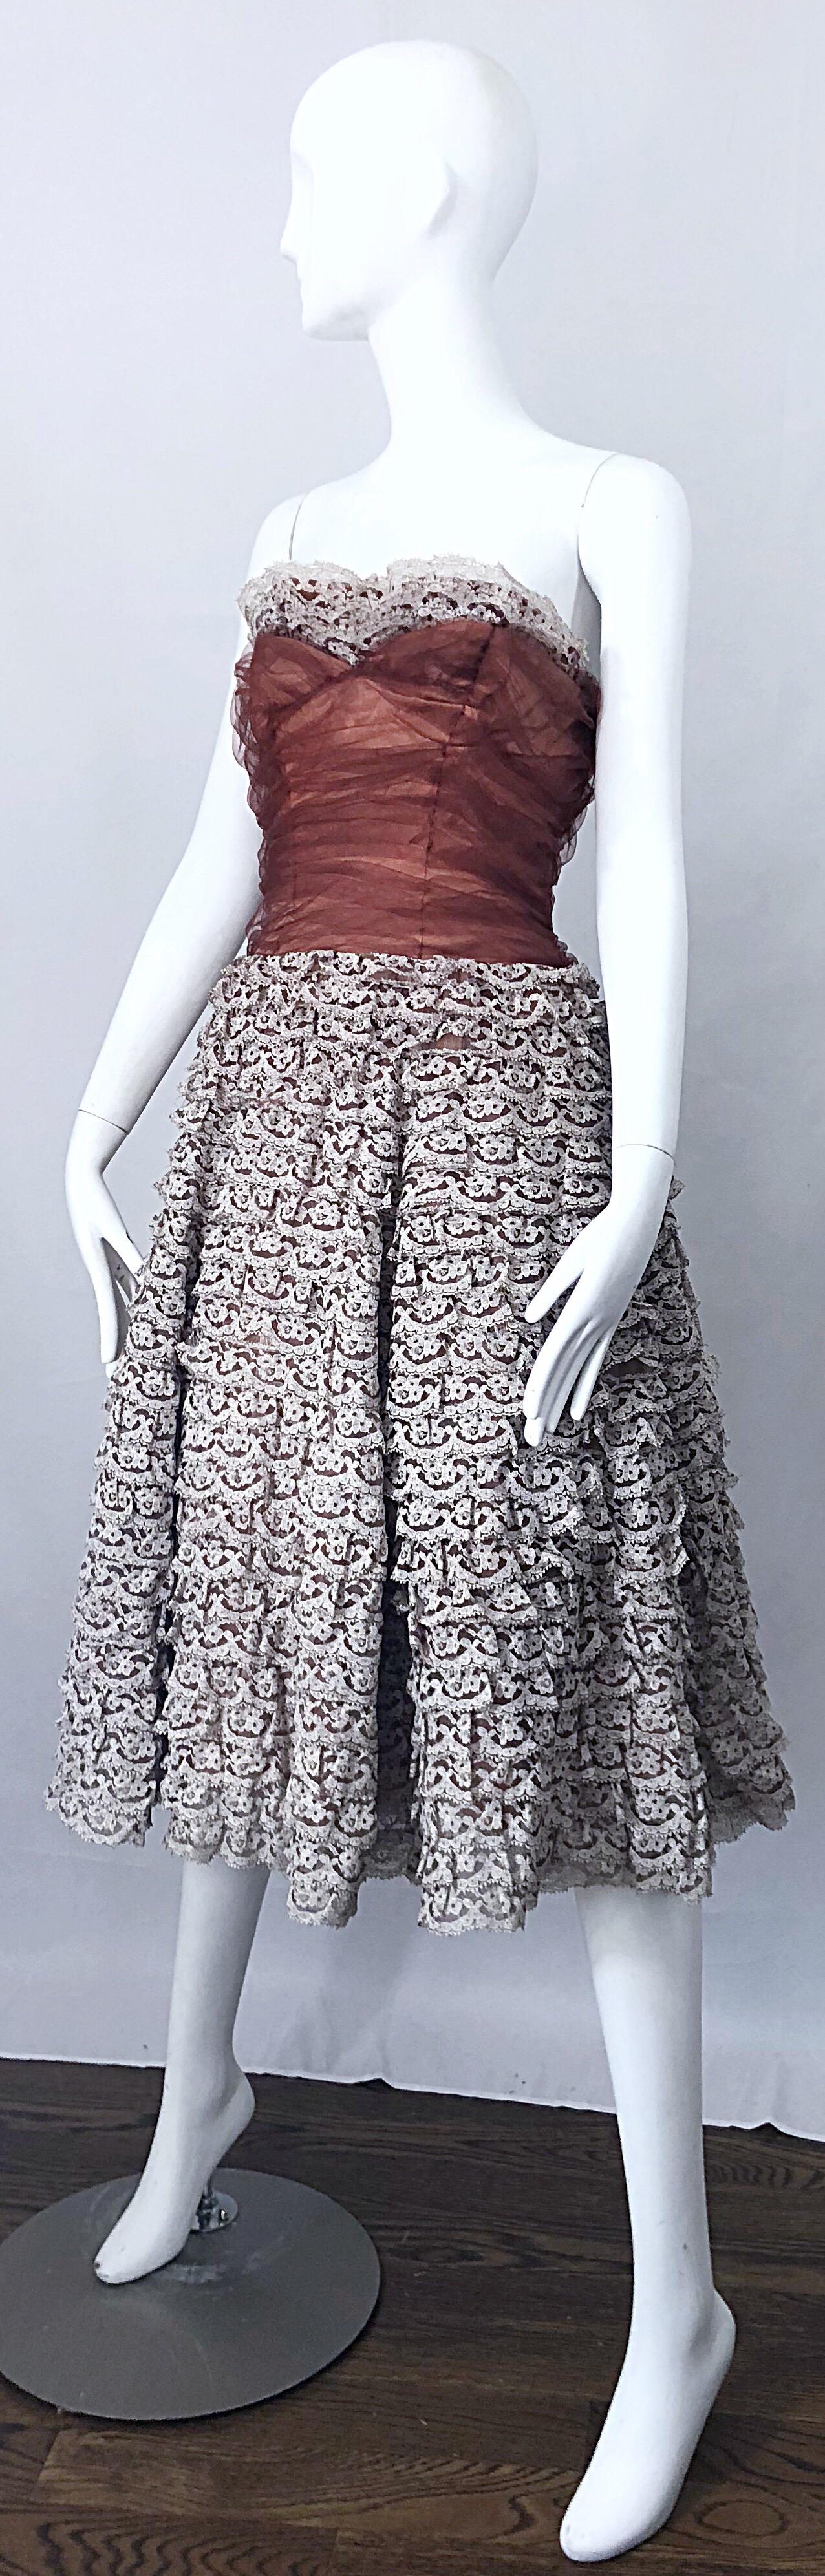 Stunning 1950s Demi Couture Taupe + Terra Cotta Vintage 50s Strapless Lace Dress In Excellent Condition For Sale In San Diego, CA